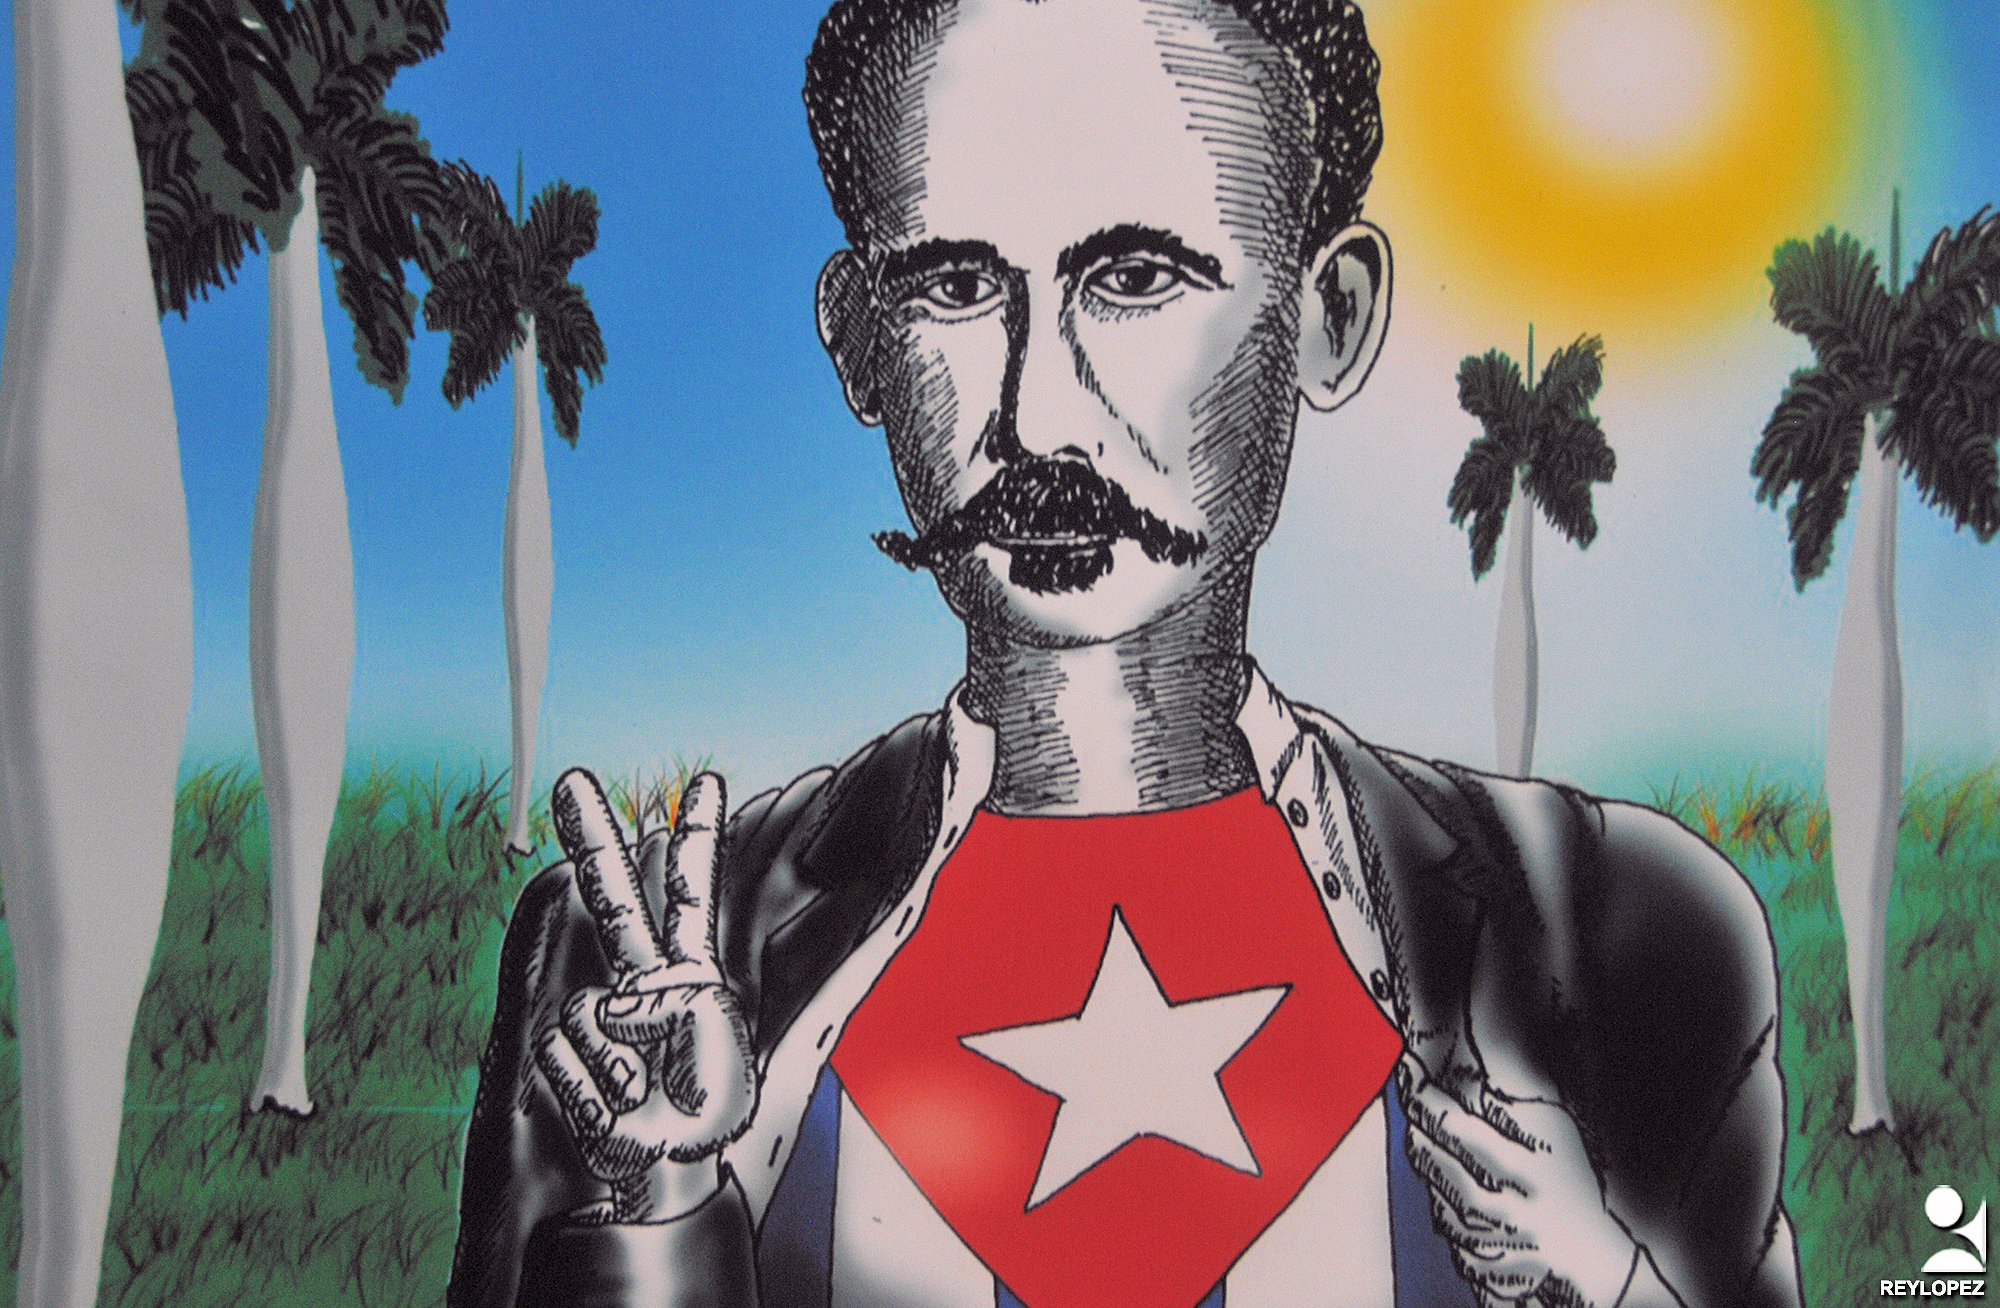 128th anniversary of the  José Martí fall in combat